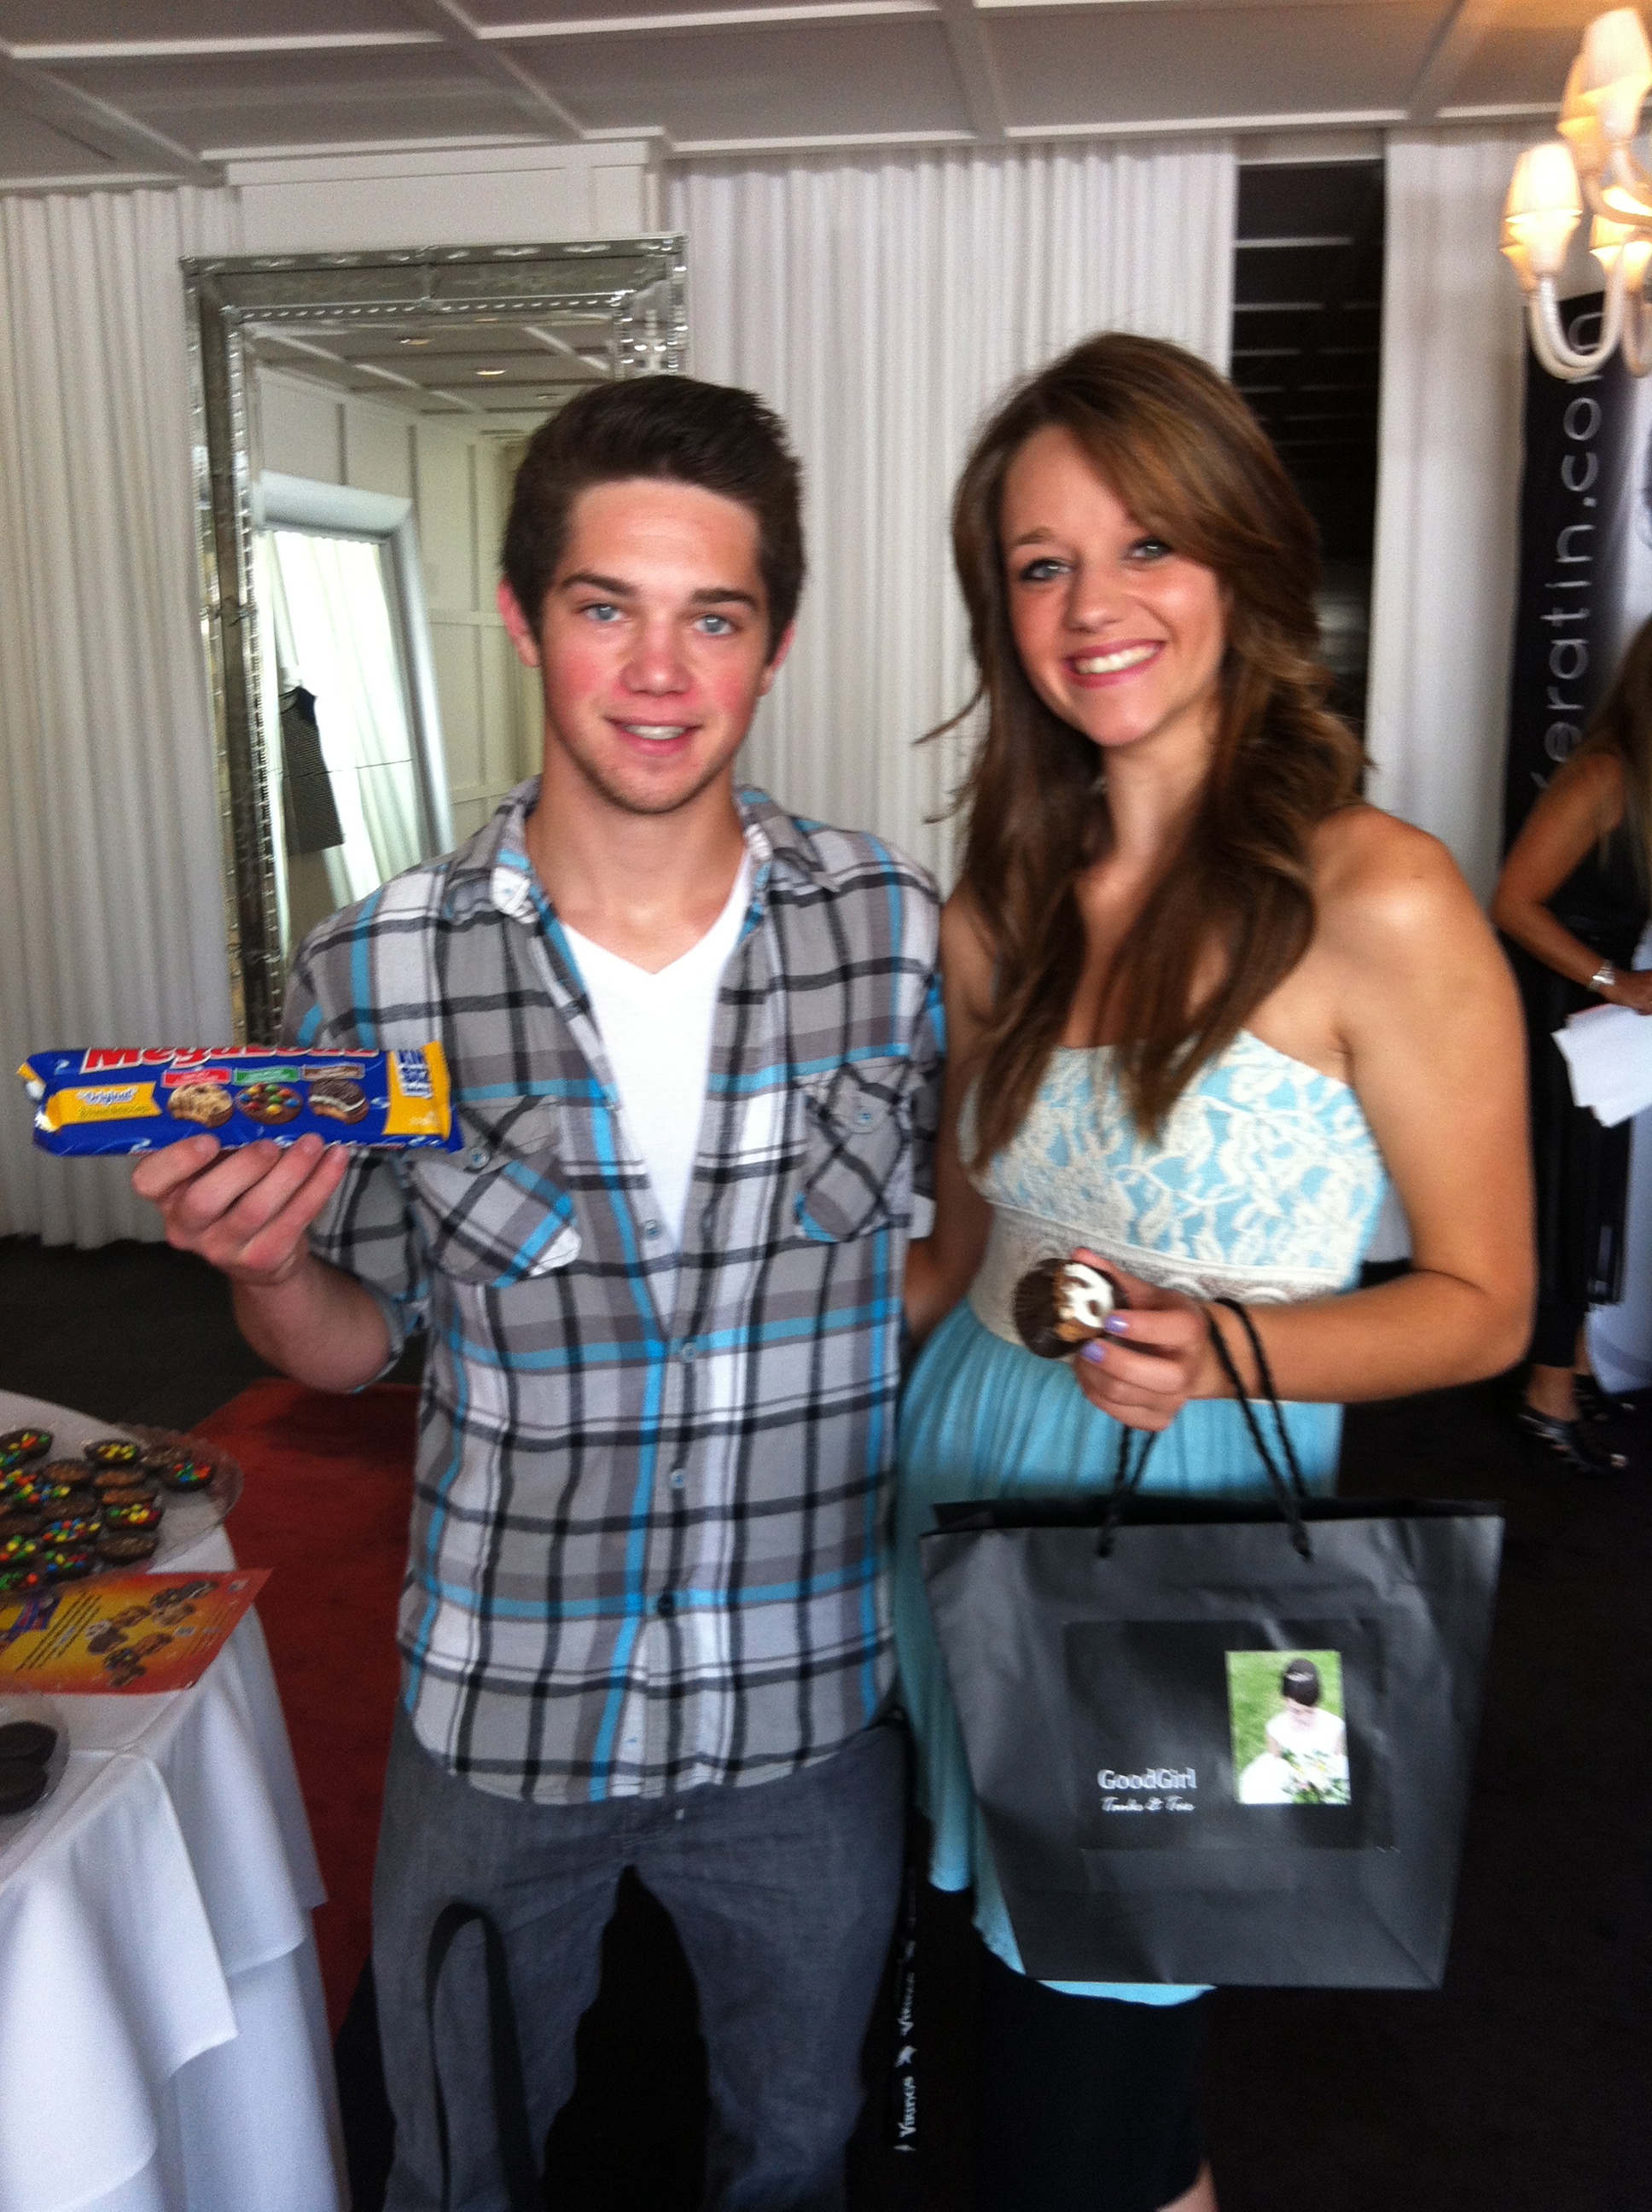 General Hospital Actor - Jimmy Dreshler with his delectable treat from Megaload Chocolate